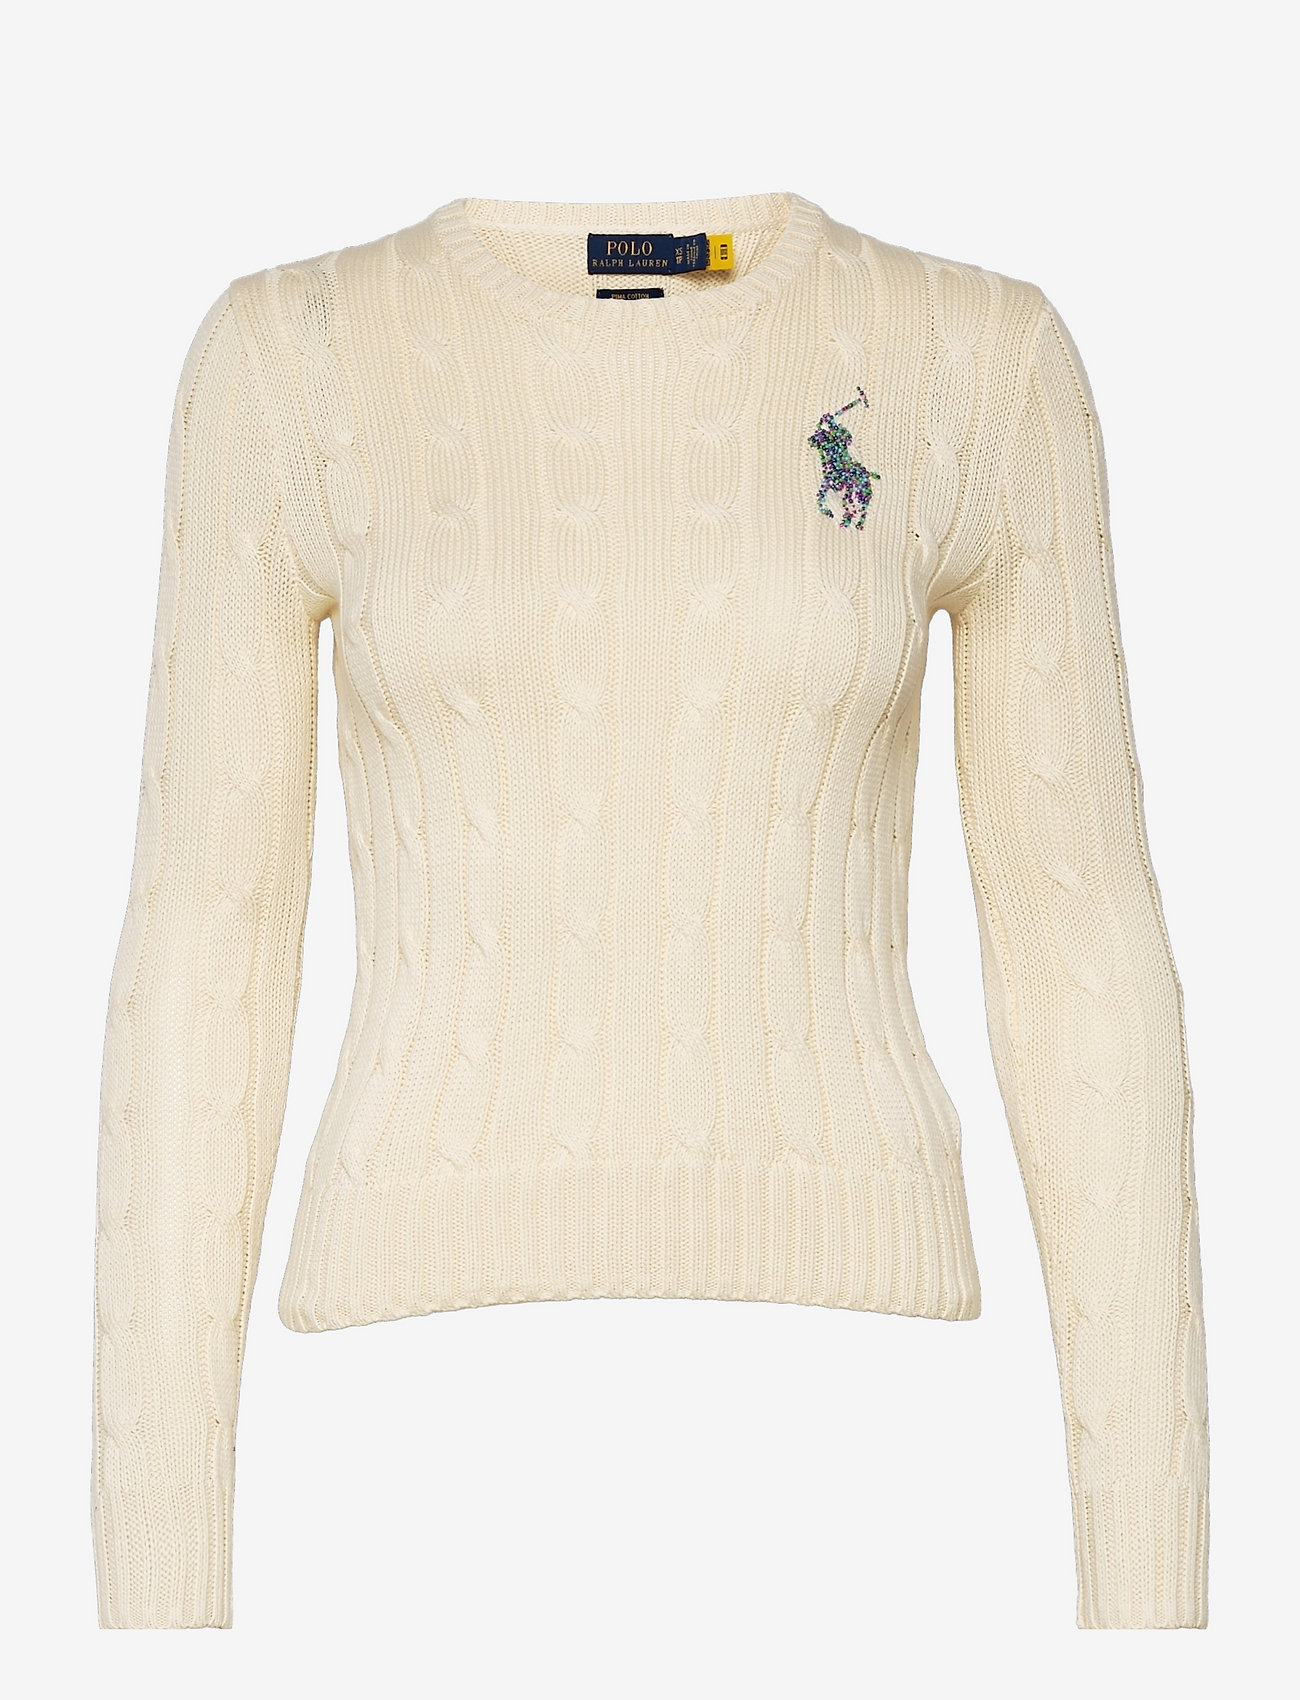 Beaded Big Pony Cable-Knit Sweater